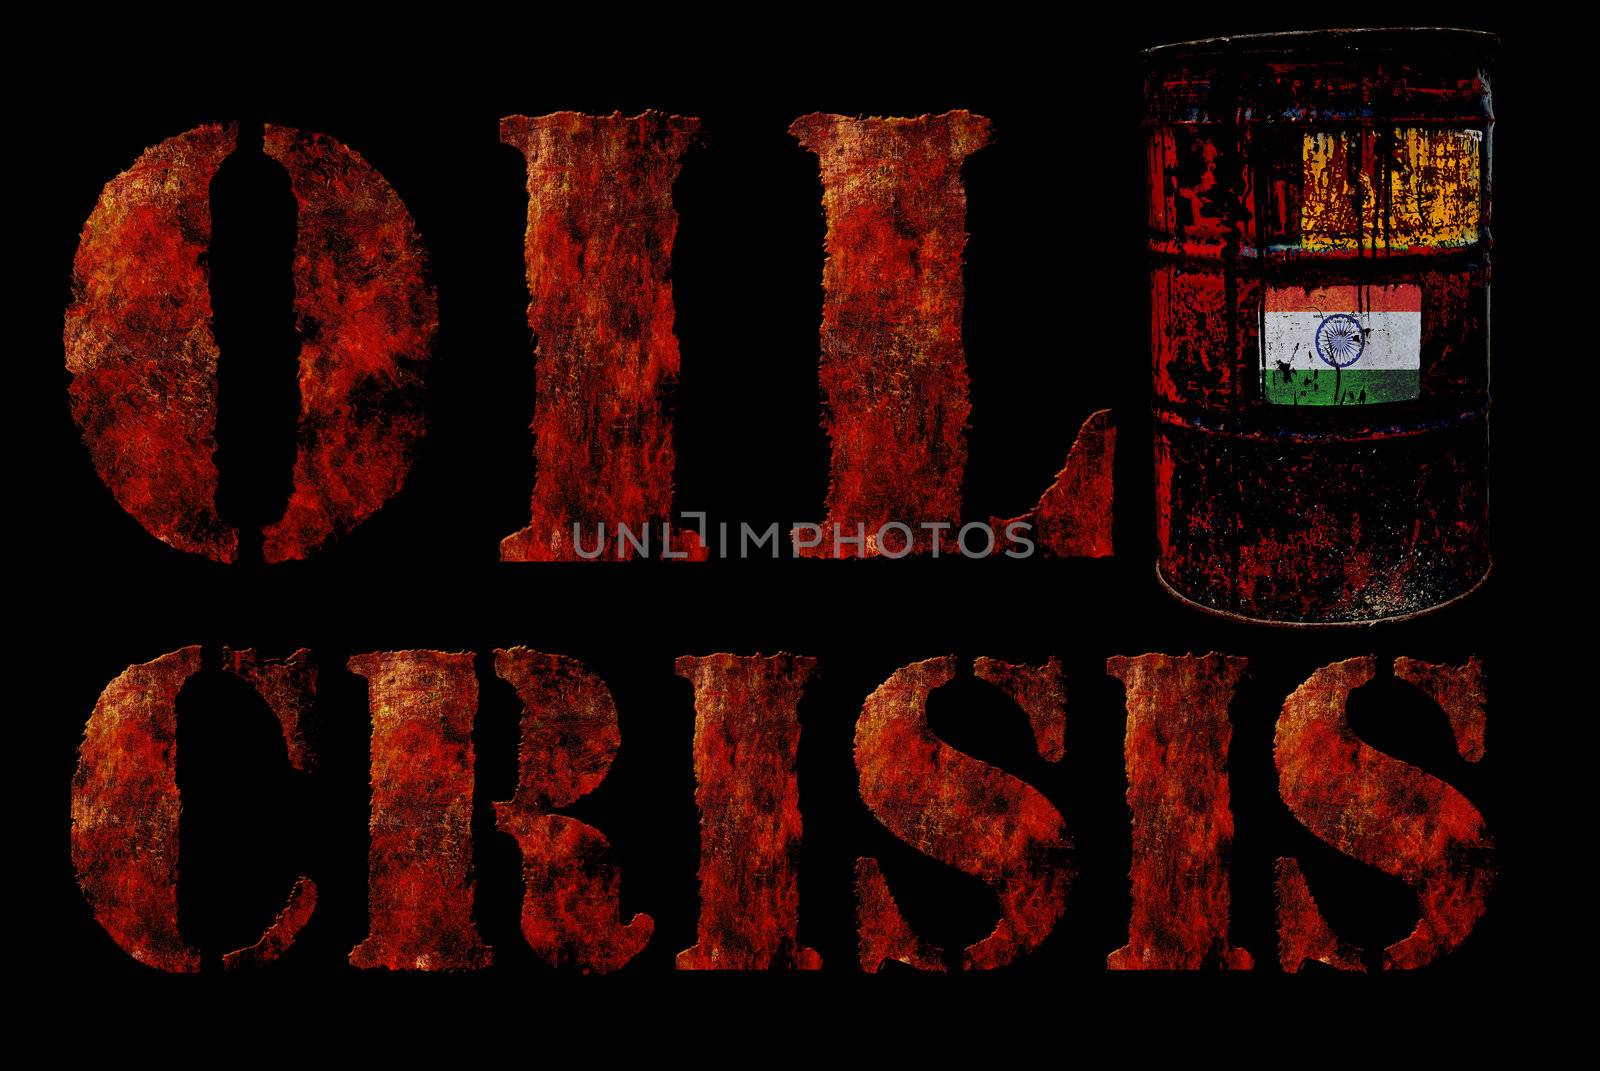 Global economic oil crisis with vintage rusty oil drum and grudge text background. Suitable for all oil crisis economic business concept, logo, icon design. With India flag.